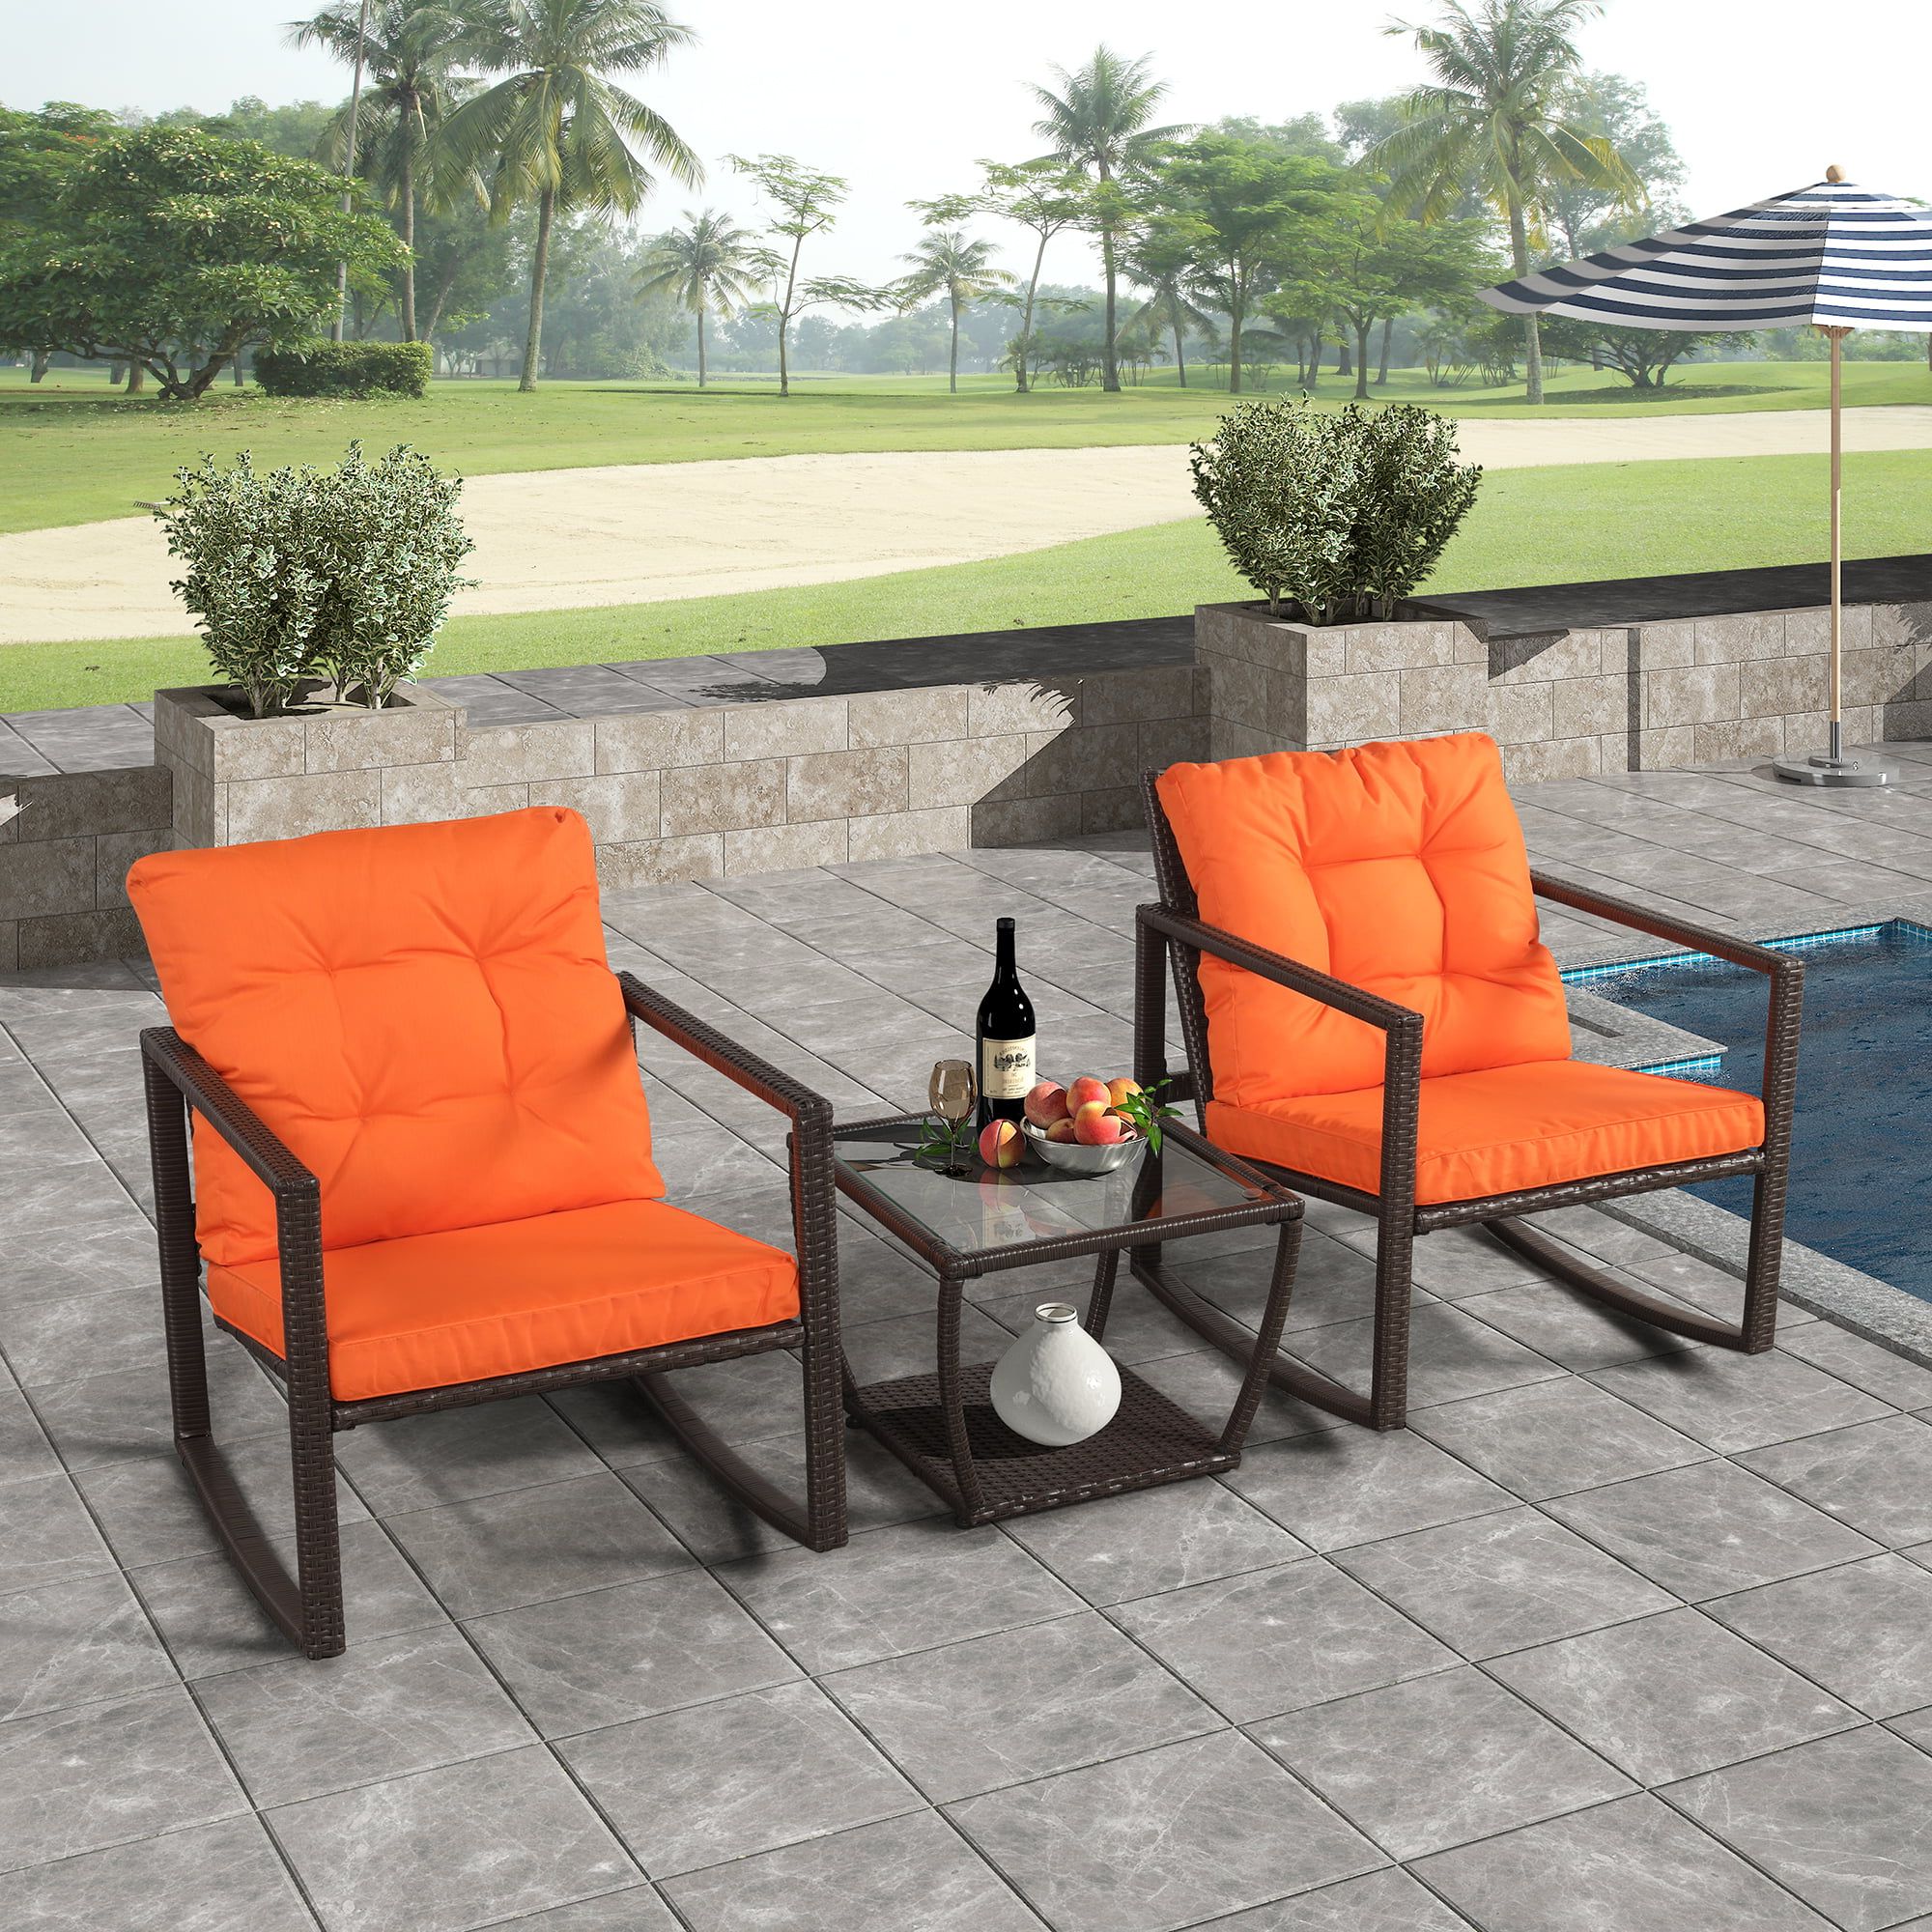 Well Known 3 Piece Cushion Rocking Chair Set Intended For Outdoor Rocking Chair 3 Piece Patio Set, Wicker Outdoor Patio Furniture  With Rocking Chair And Table, Patio Rocking Chair For Outdoor Garden,  All Weather Rocking Lounge Chair, Orange Cushion, W10688 – Walmart (Photo 12 of 15)